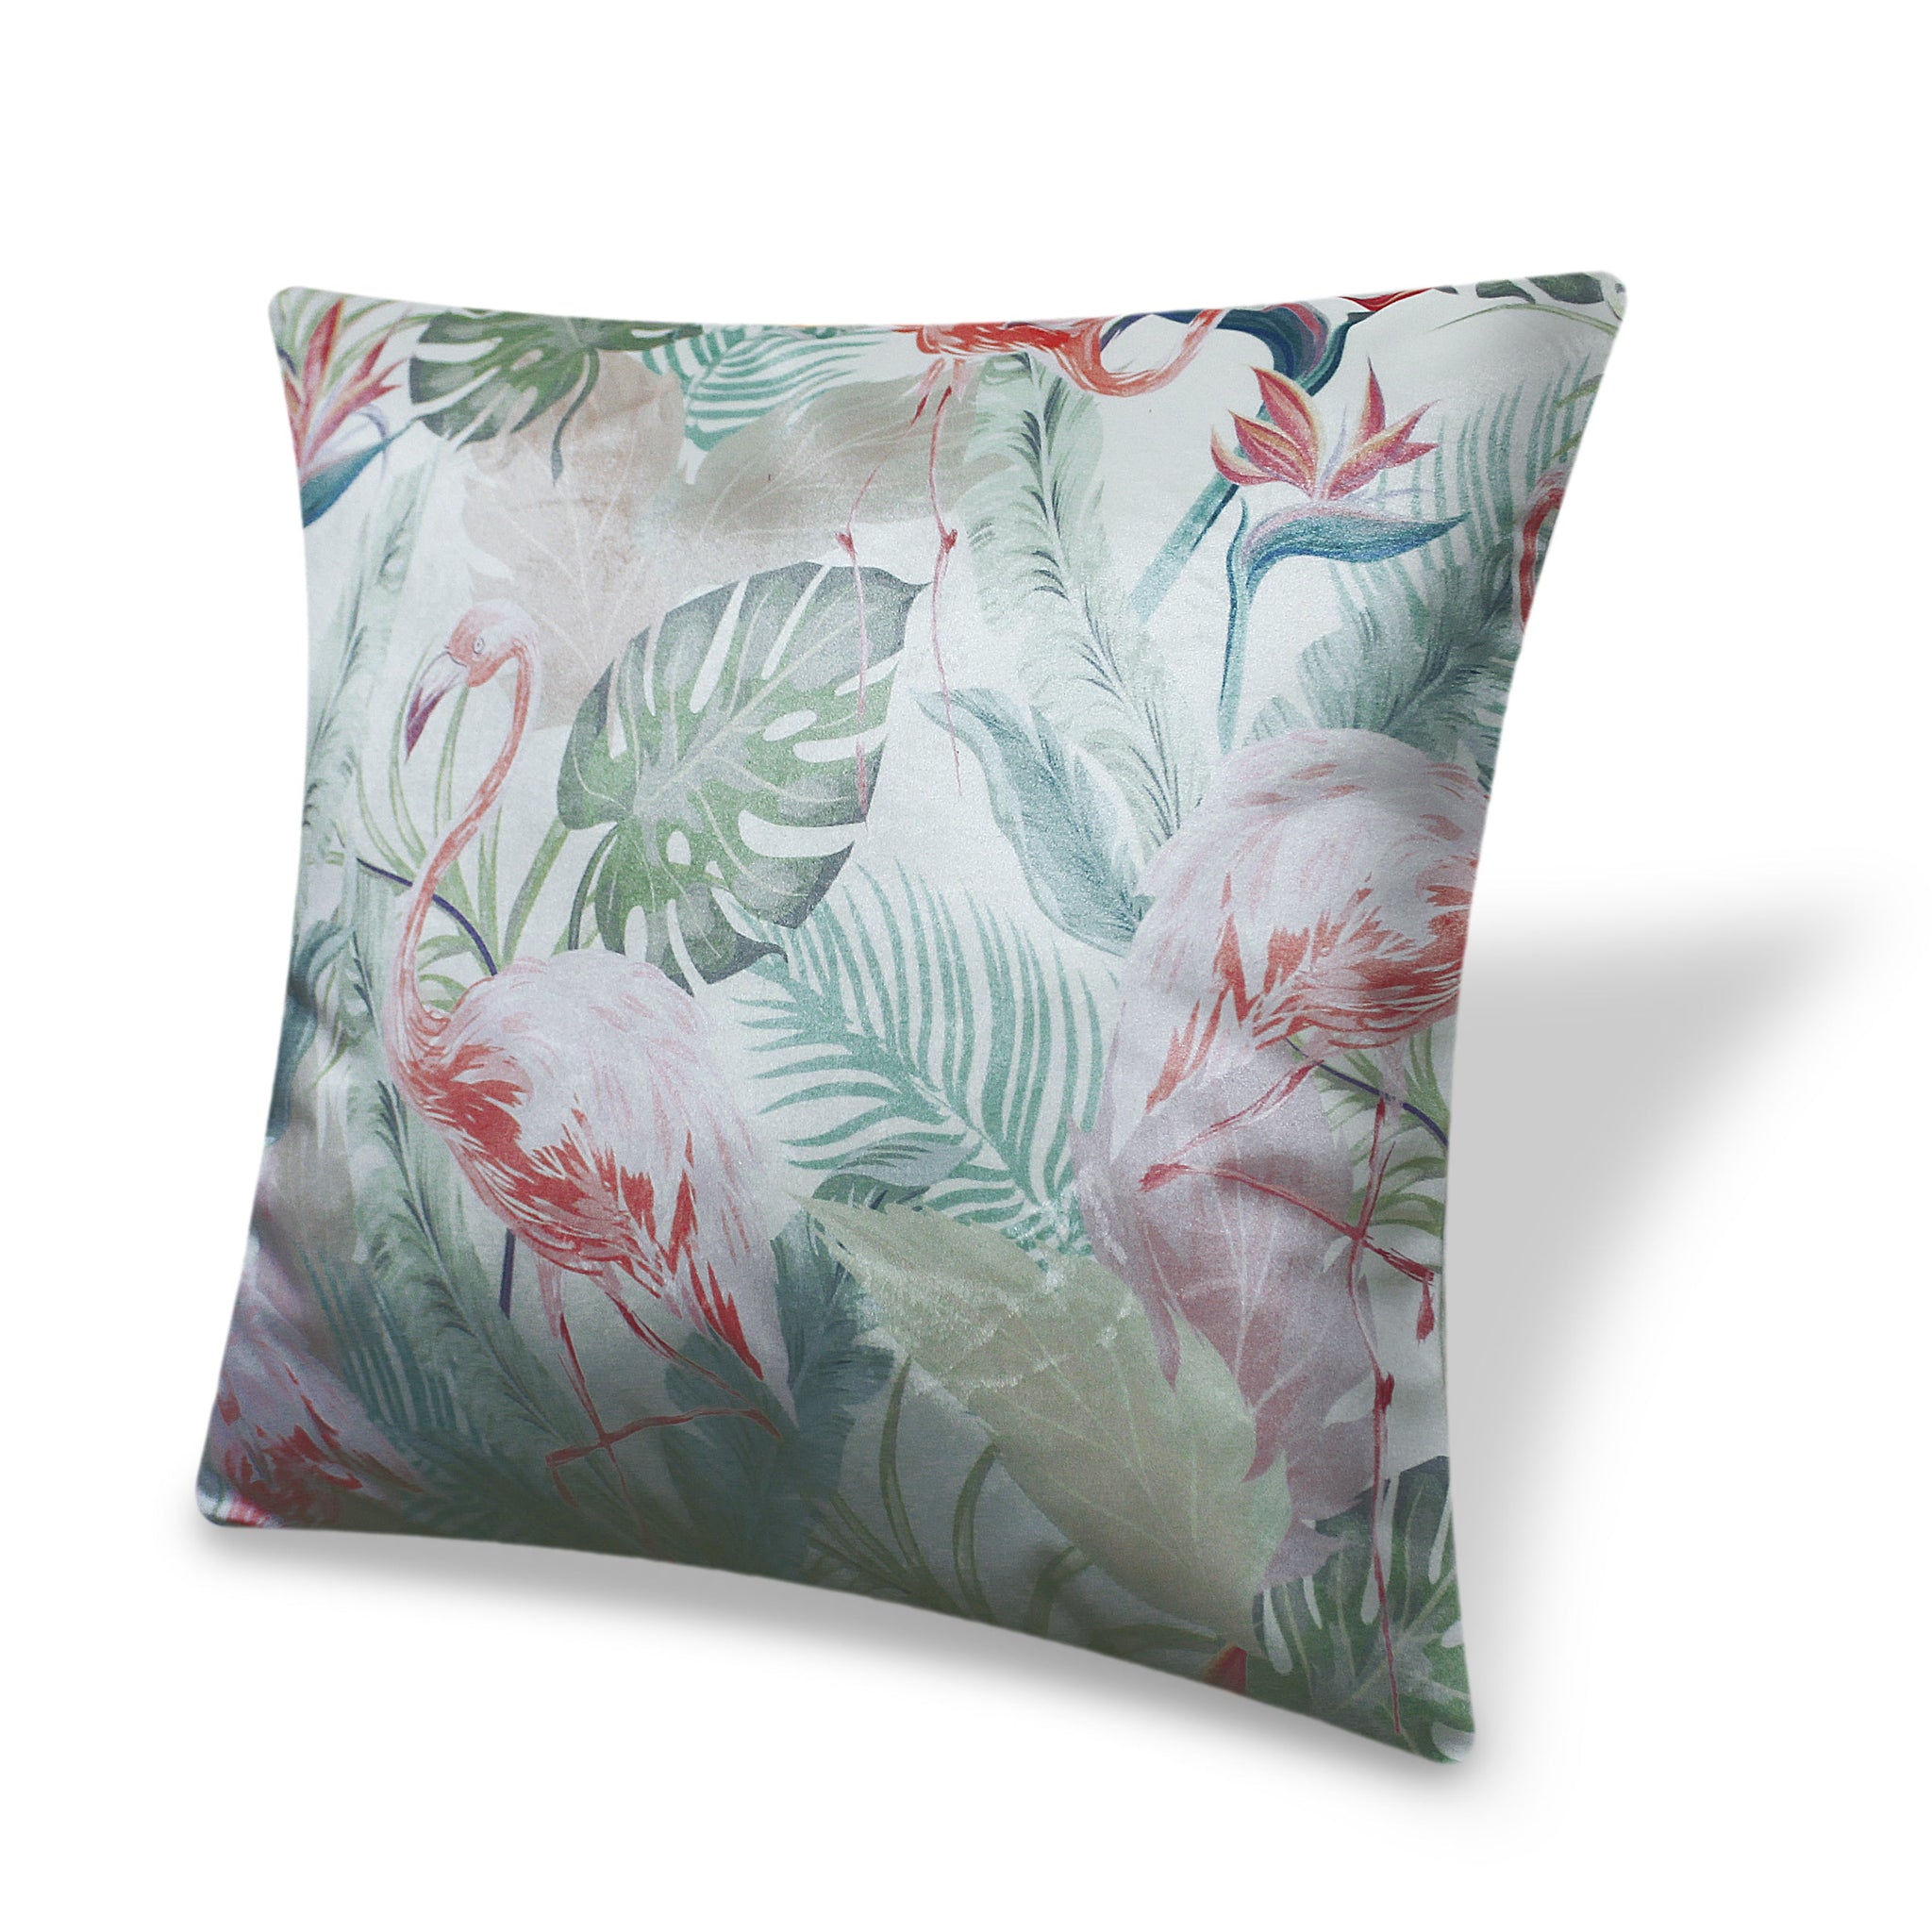 Velvet Cushion Cover Watercolor Flamingo and Floral Decorative Pillow Cover Home Decor Throw Pillow for Couch Sofa Chair Bedroom 45x45 cm 18x18 In